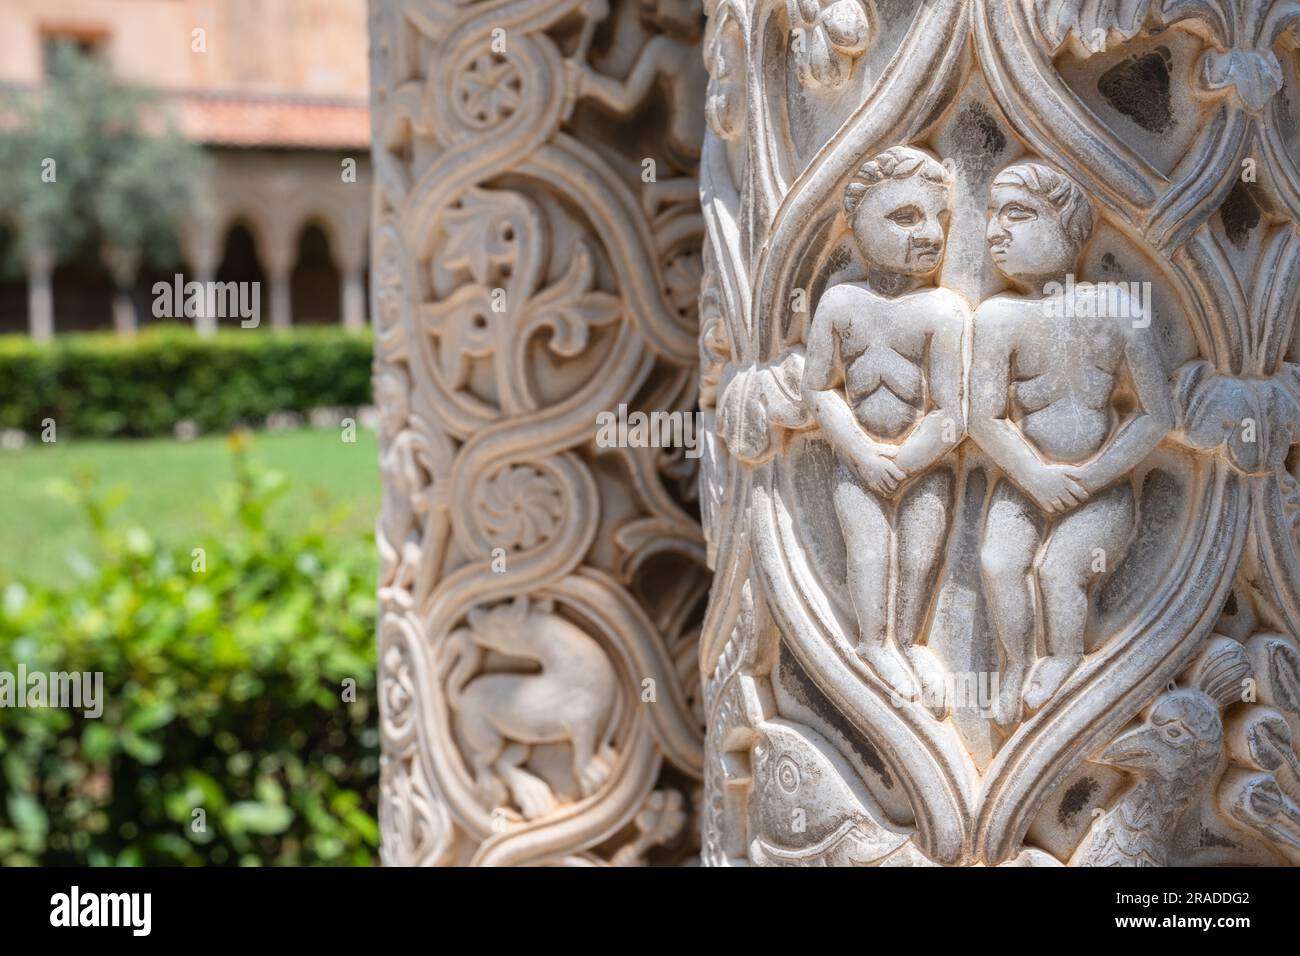 Relief with Adam and Eve on column, with garden in blurred background, Cloister of Monreale, Sicily Stock Photo